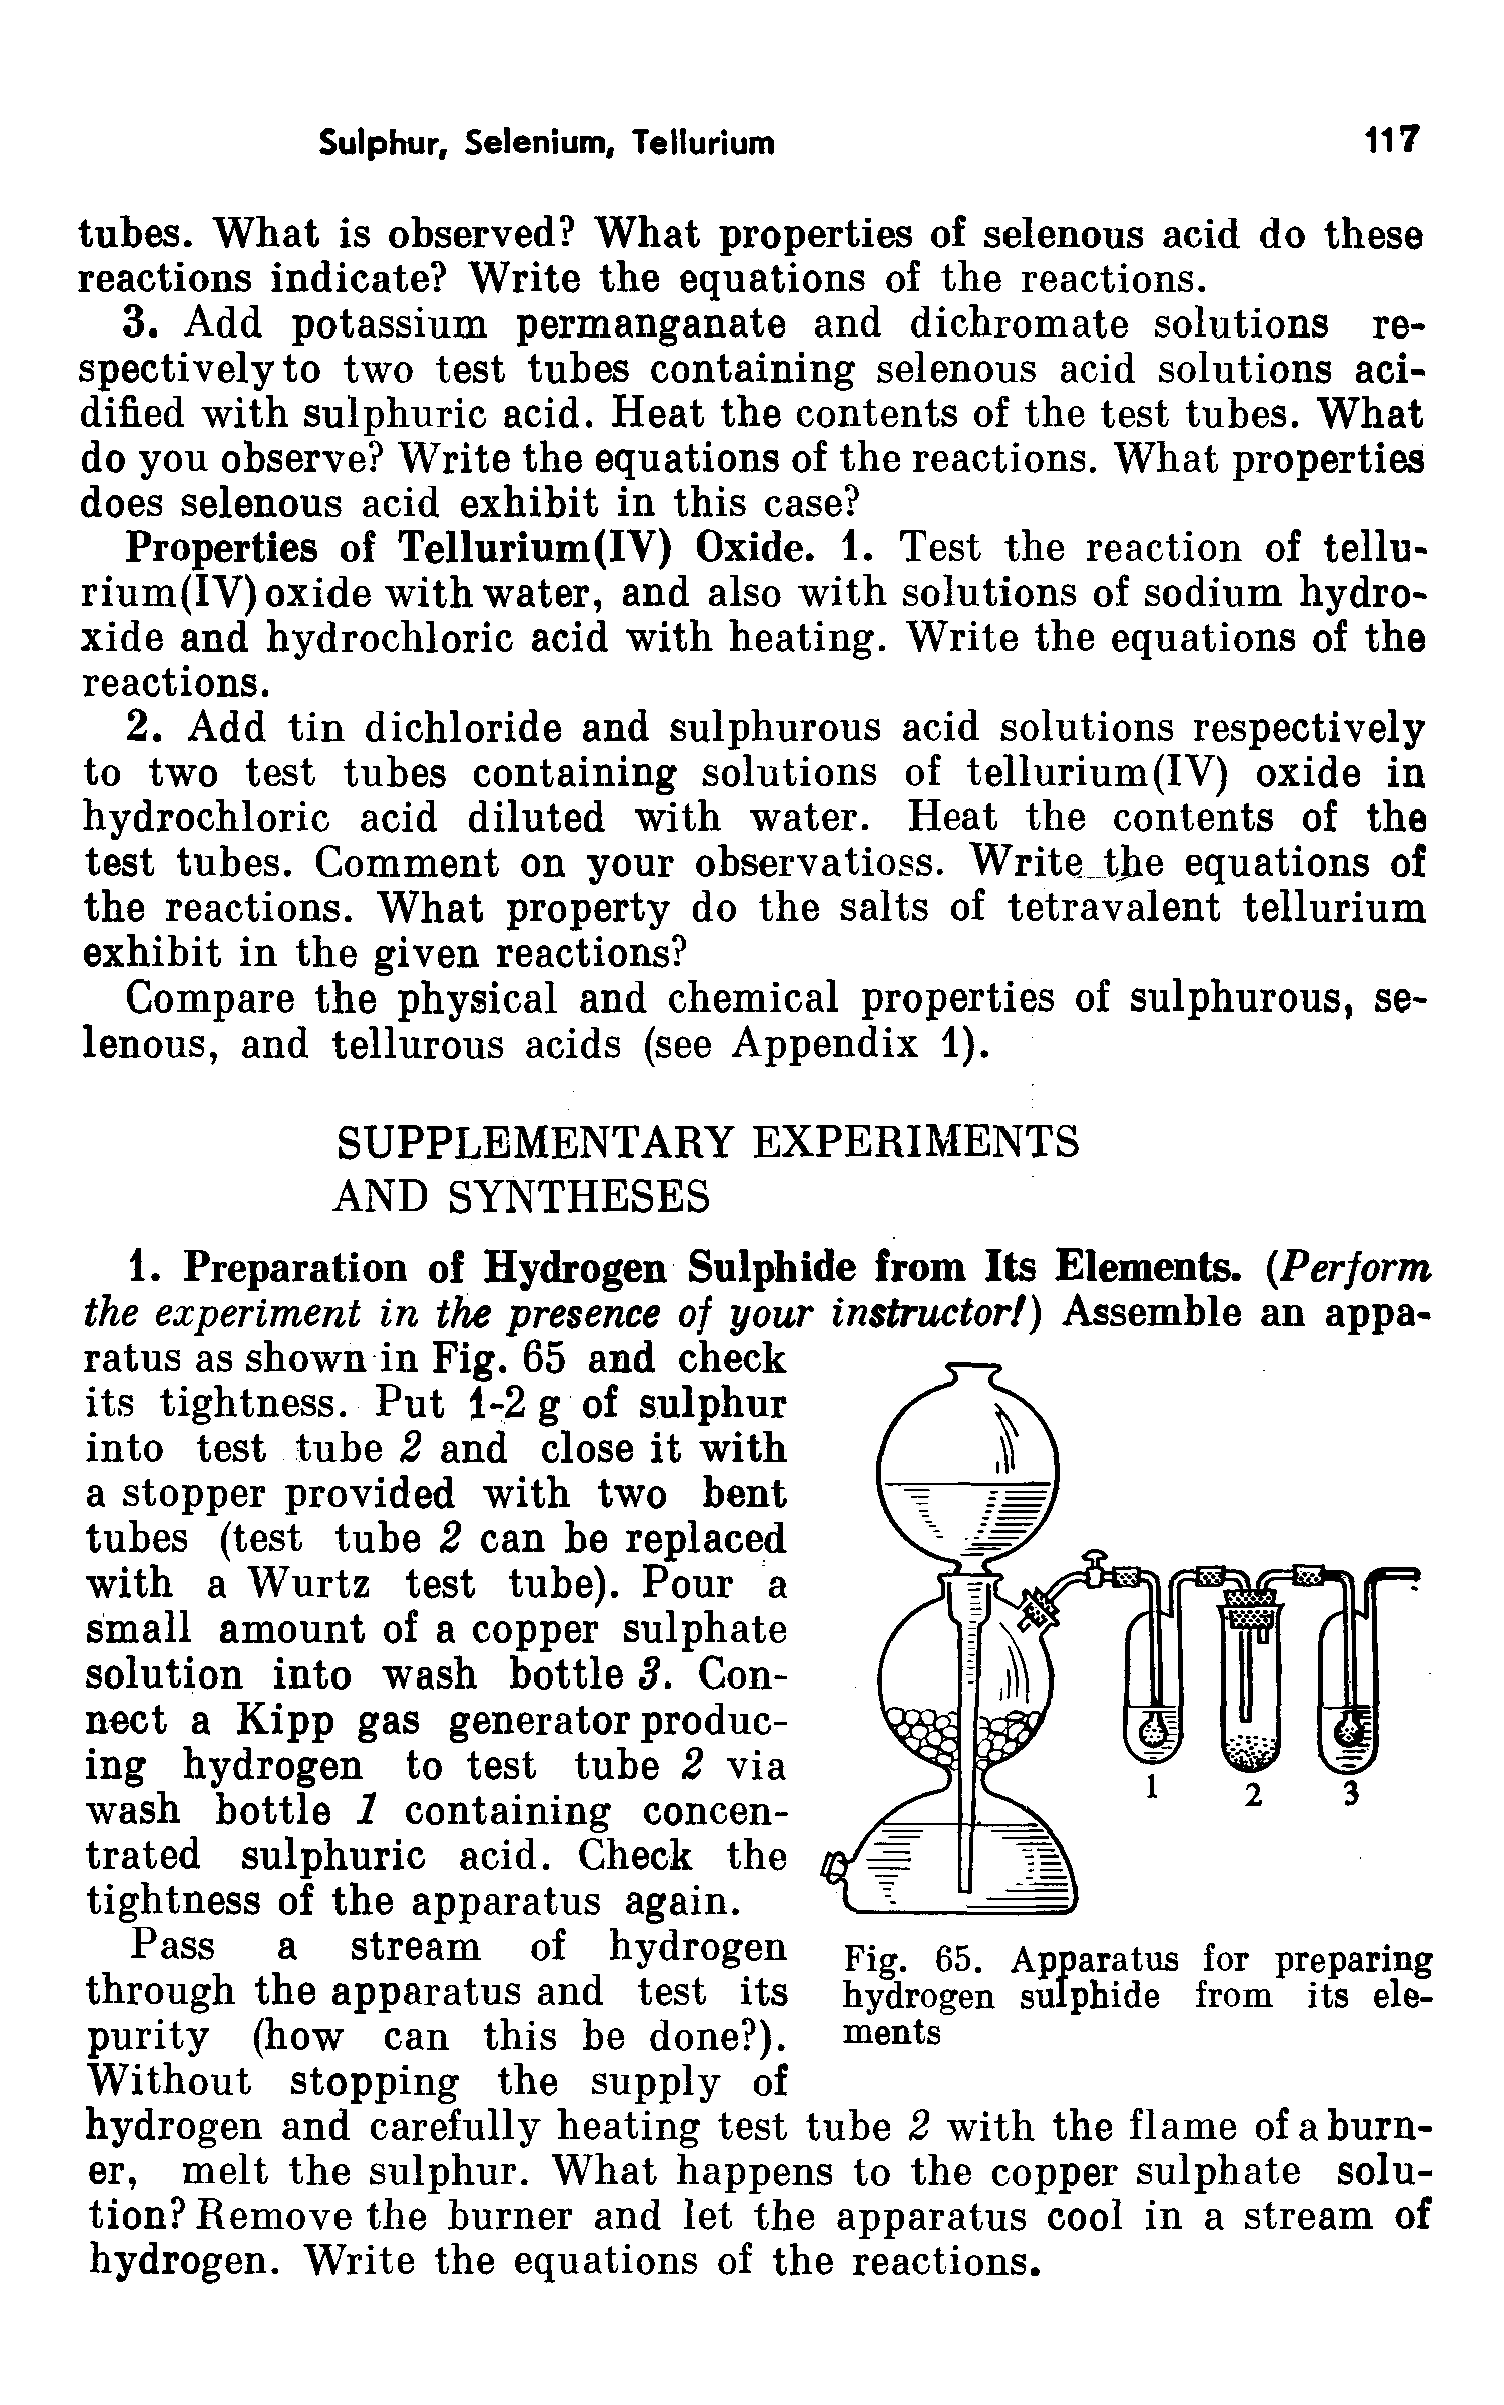 Fig. 65. Apparatus for preparing hydrogen sulphide from its elements...